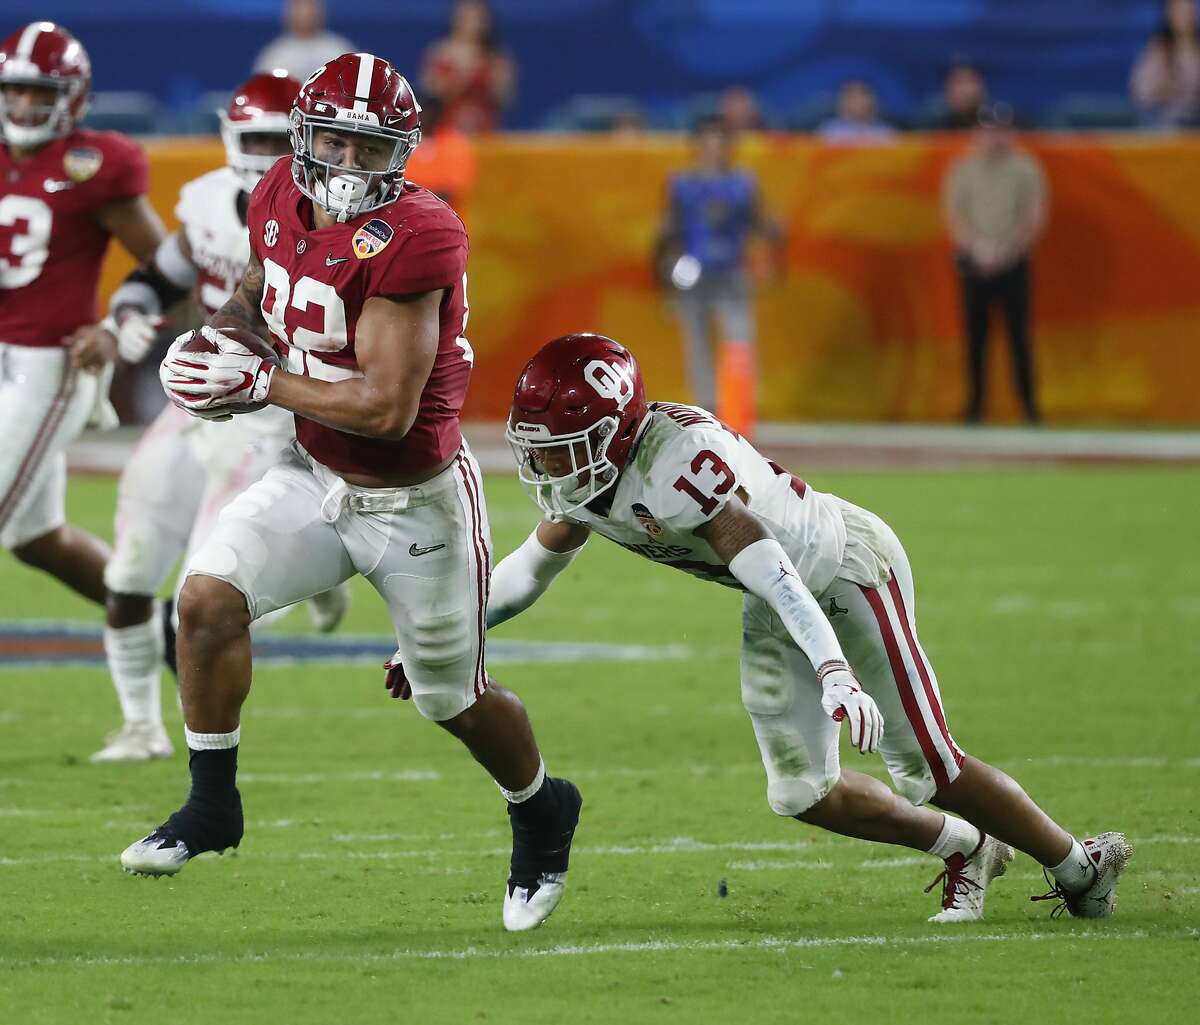 Alabama tight end Irv Smith Jr. (82) runs the ball as Oklahoma cornerback Tre Norwood (13) attempts to tackle, during the second half of the Orange Bowl NCAA college football game, Saturday, Dec. 29, 2018, in Miami Gardens, Fla. (AP Photo/Wilfredo Lee)